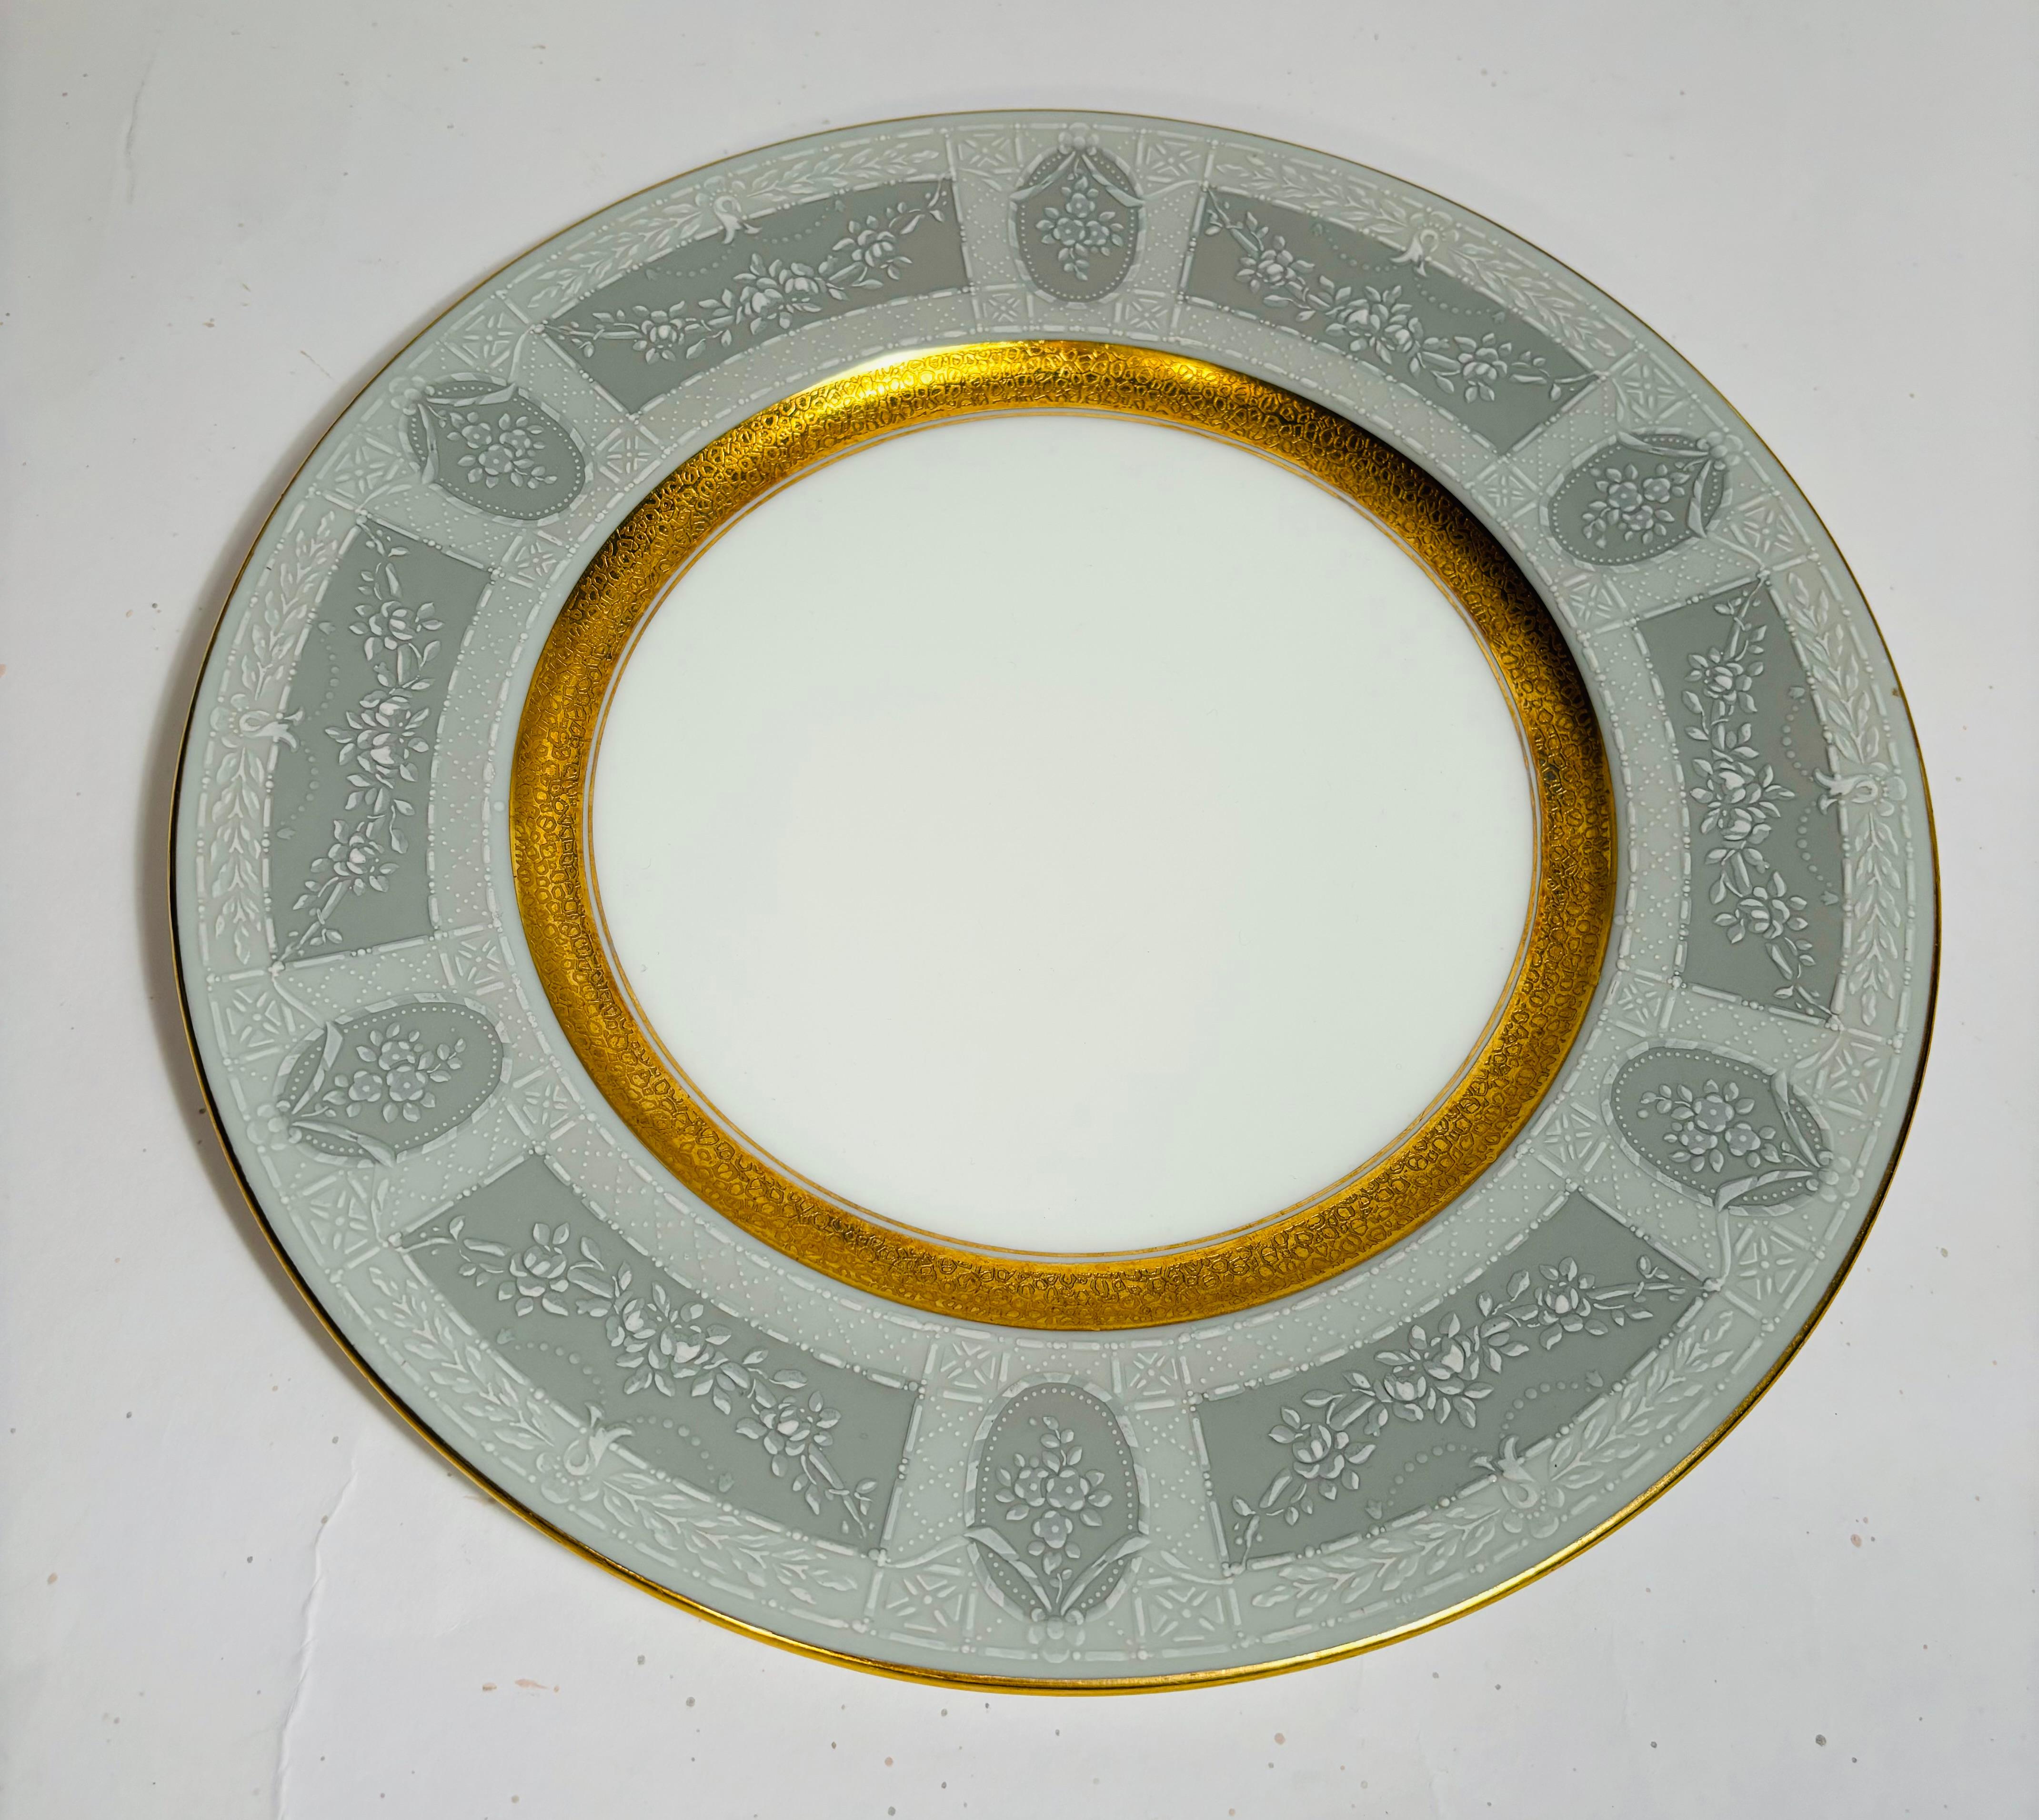 An elegant set of 4 antique dinner plates with a nice detailed pattern in the soft grey collars and trimmed with 24 karat gold and featuring a wider gold band in the center surround. In wonderful antique condition and ready to mix and match in with